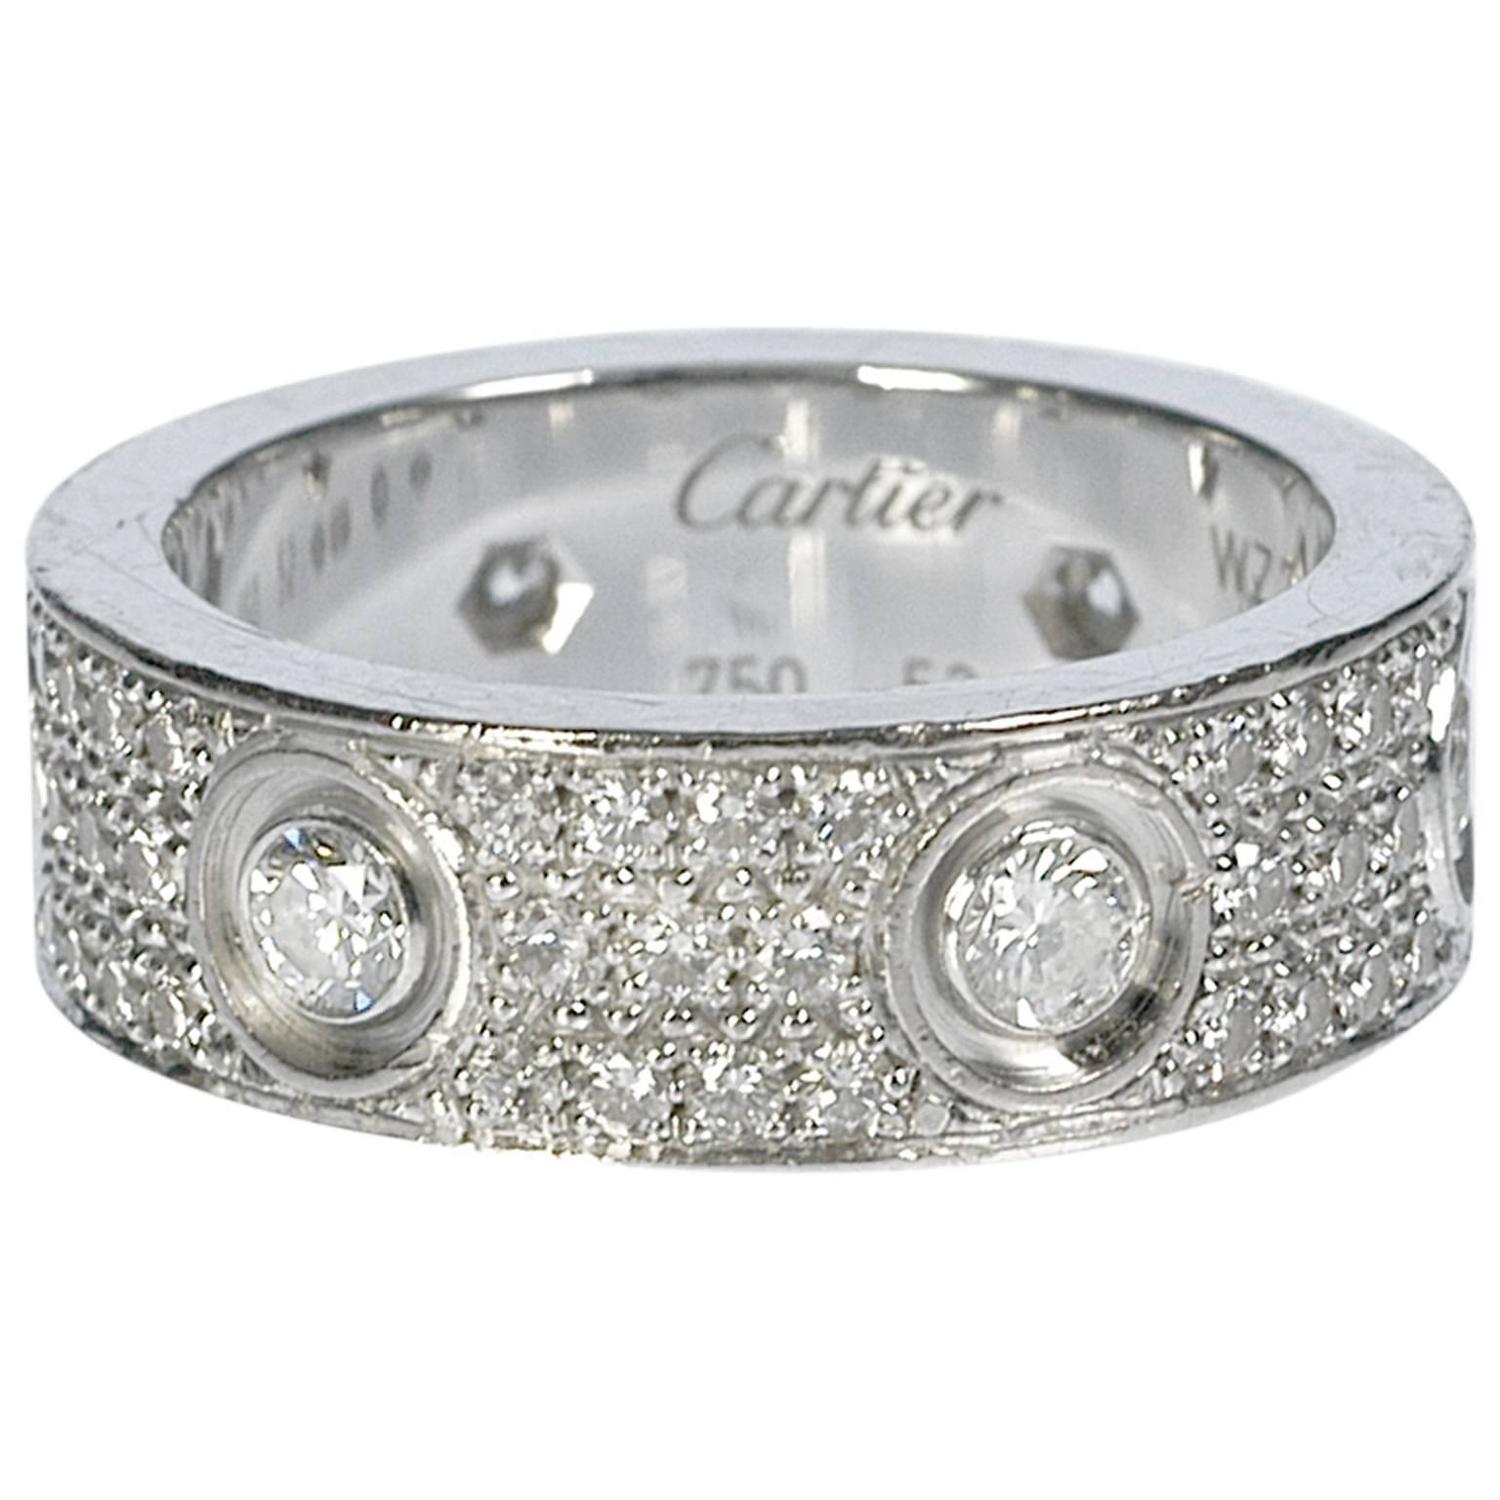 Cartier Diamond Gold Love Wedding Band Ring For Sale at